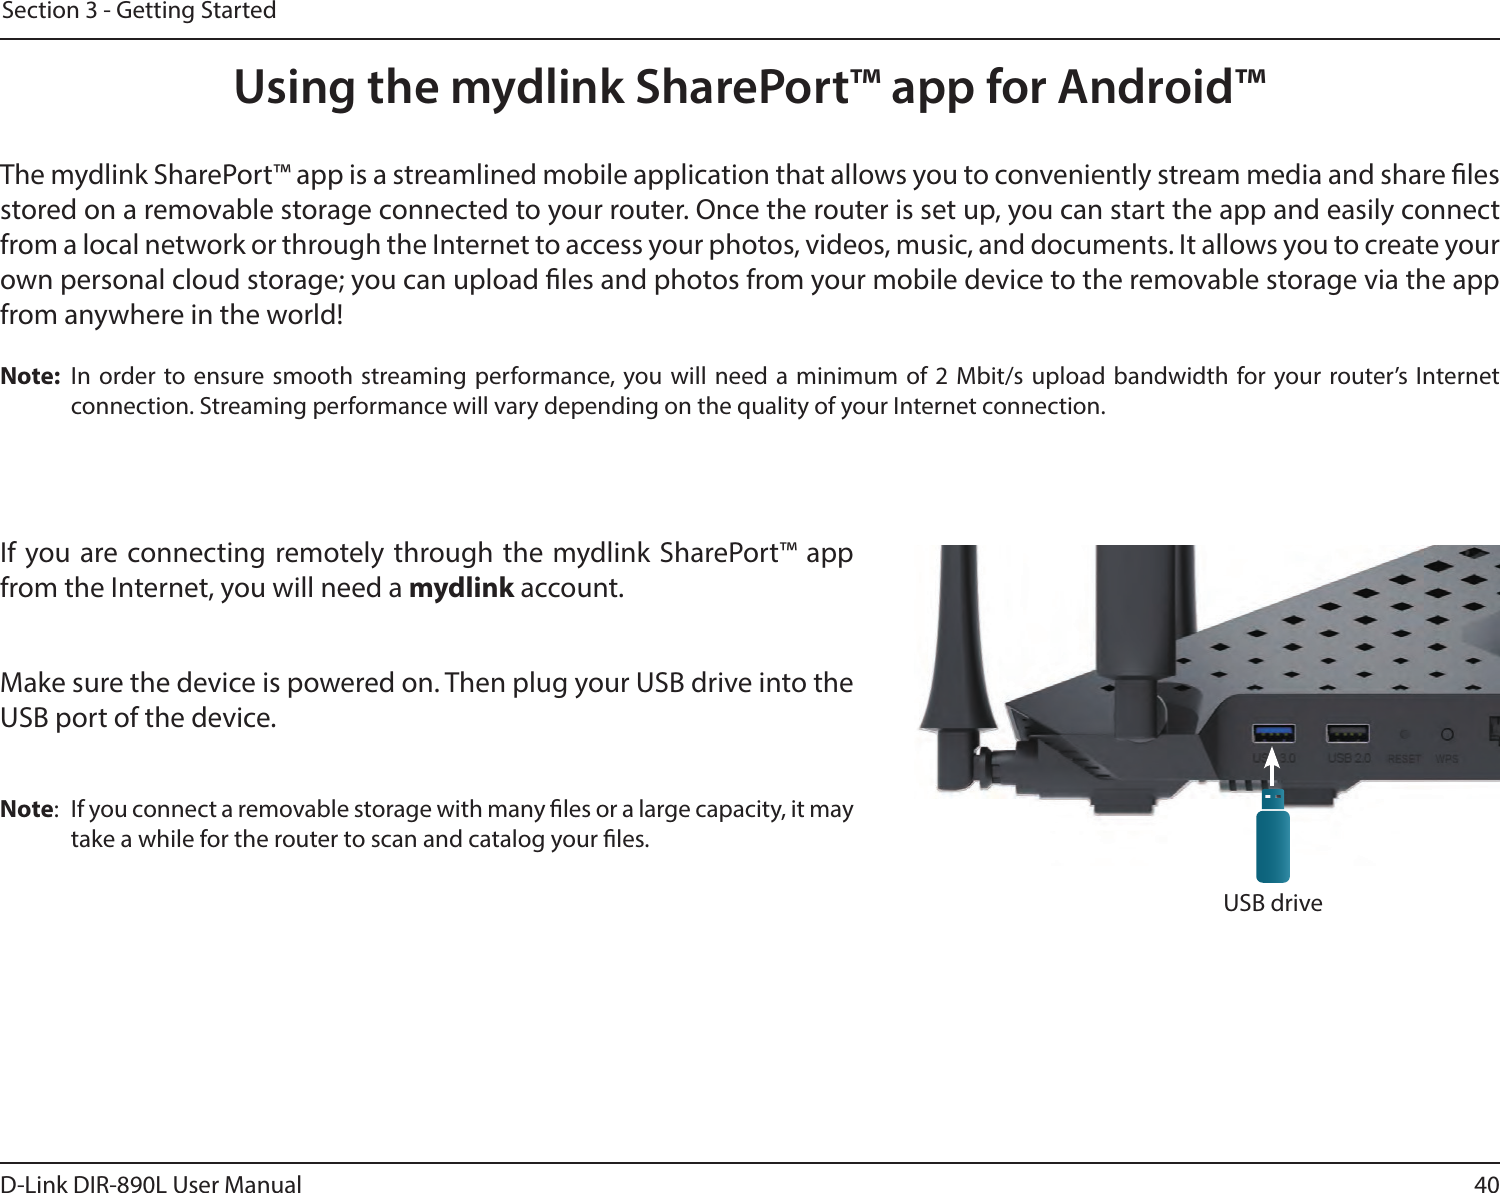 40D-Link DIR-890L User ManualSection 3 - Getting StartedUsing the mydlink SharePort™ app for Android™The mydlink SharePort™ app is a streamlined mobile application that allows you to conveniently stream media and share les stored on a removable storage connected to your router. Once the router is set up, you can start the app and easily connect from a local network or through the Internet to access your photos, videos, music, and documents. It allows you to create your own personal cloud storage; you can upload les and photos from your mobile device to the removable storage via the app from anywhere in the world!Note:  In order to ensure smooth streaming performance, you will need a minimum of 2 Mbit/s upload bandwidth for your router’s Internet connection. Streaming performance will vary depending on the quality of your Internet connection.If you are connecting remotely through the mydlink SharePort™ app from the Internet, you will need a mydlink account. Make sure the device is powered on. Then plug your USB drive into the USB port of the device.Note:  If you connect a removable storage with many les or a large capacity, it may take a while for the router to scan and catalog your les.USB drive